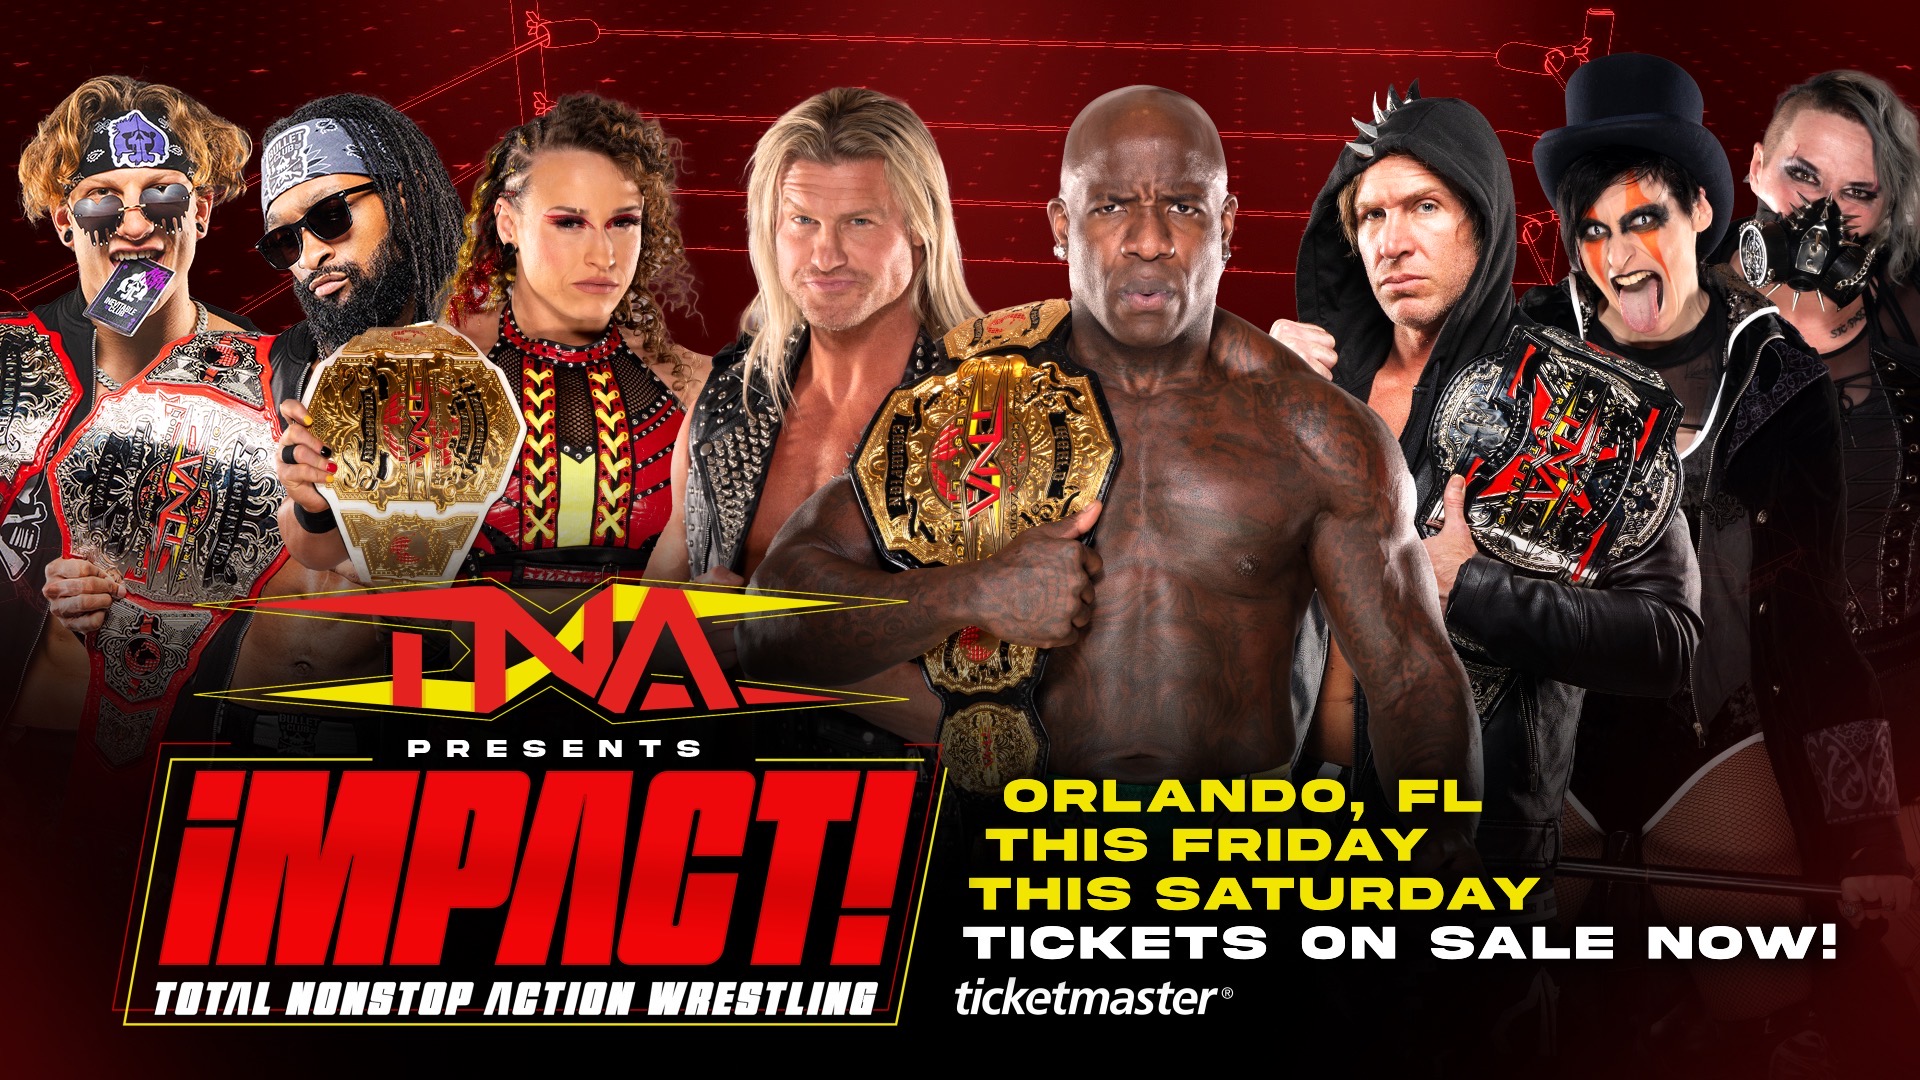 Loaded Lineup Set for TNA Wrestling LIVE in Orlando This Friday & Saturday – TNA Wrestling